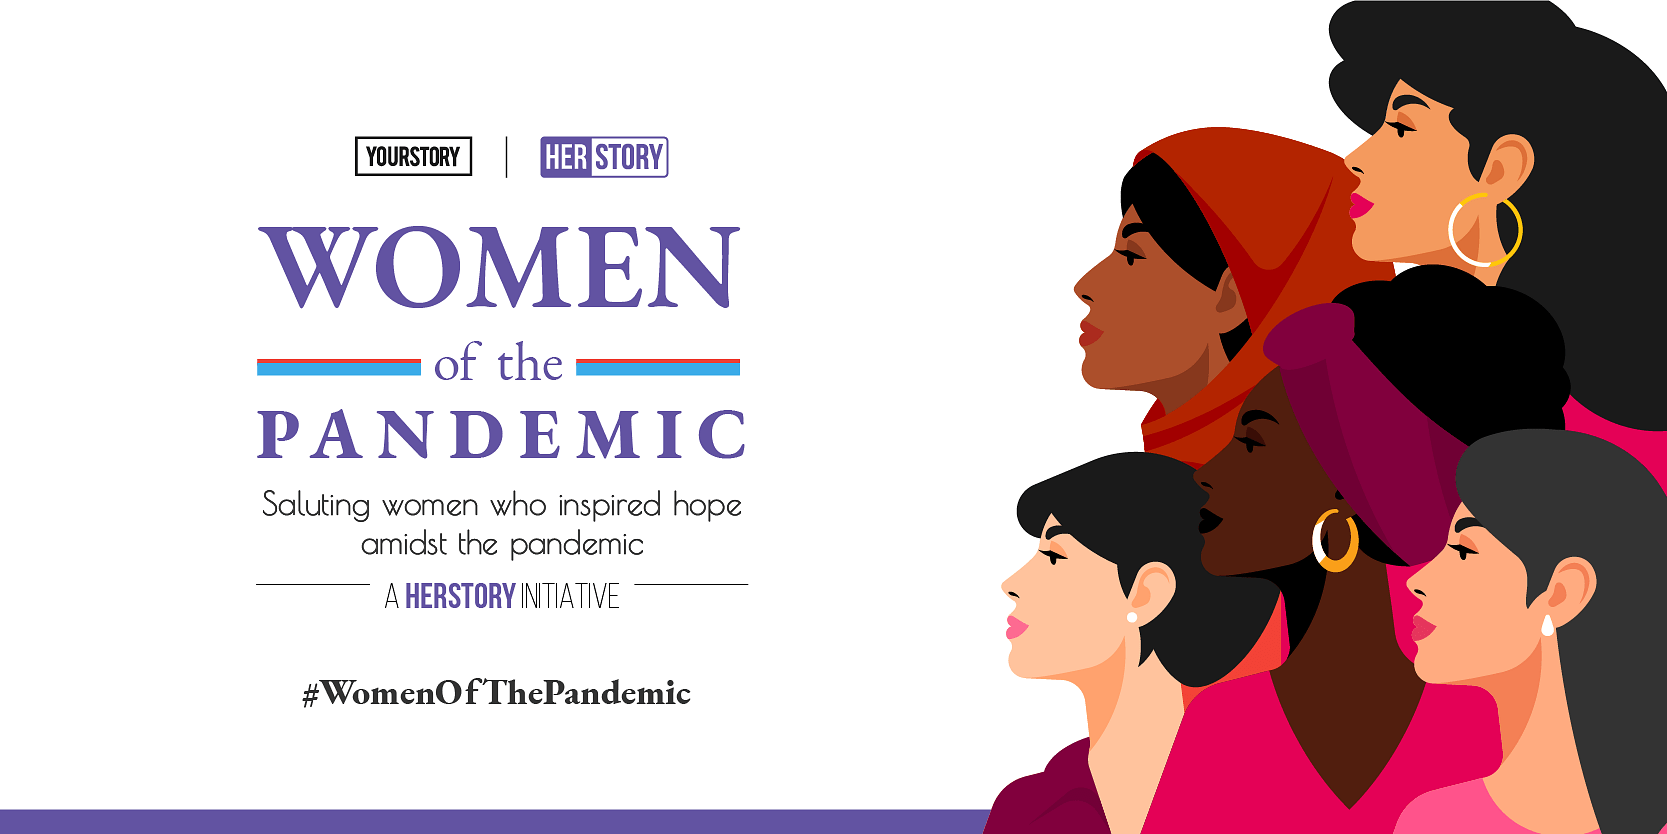 Women of the Pandemic: We must remember some of the lessons learned and not take our lives for granted, says ElsaMarie D'Silva